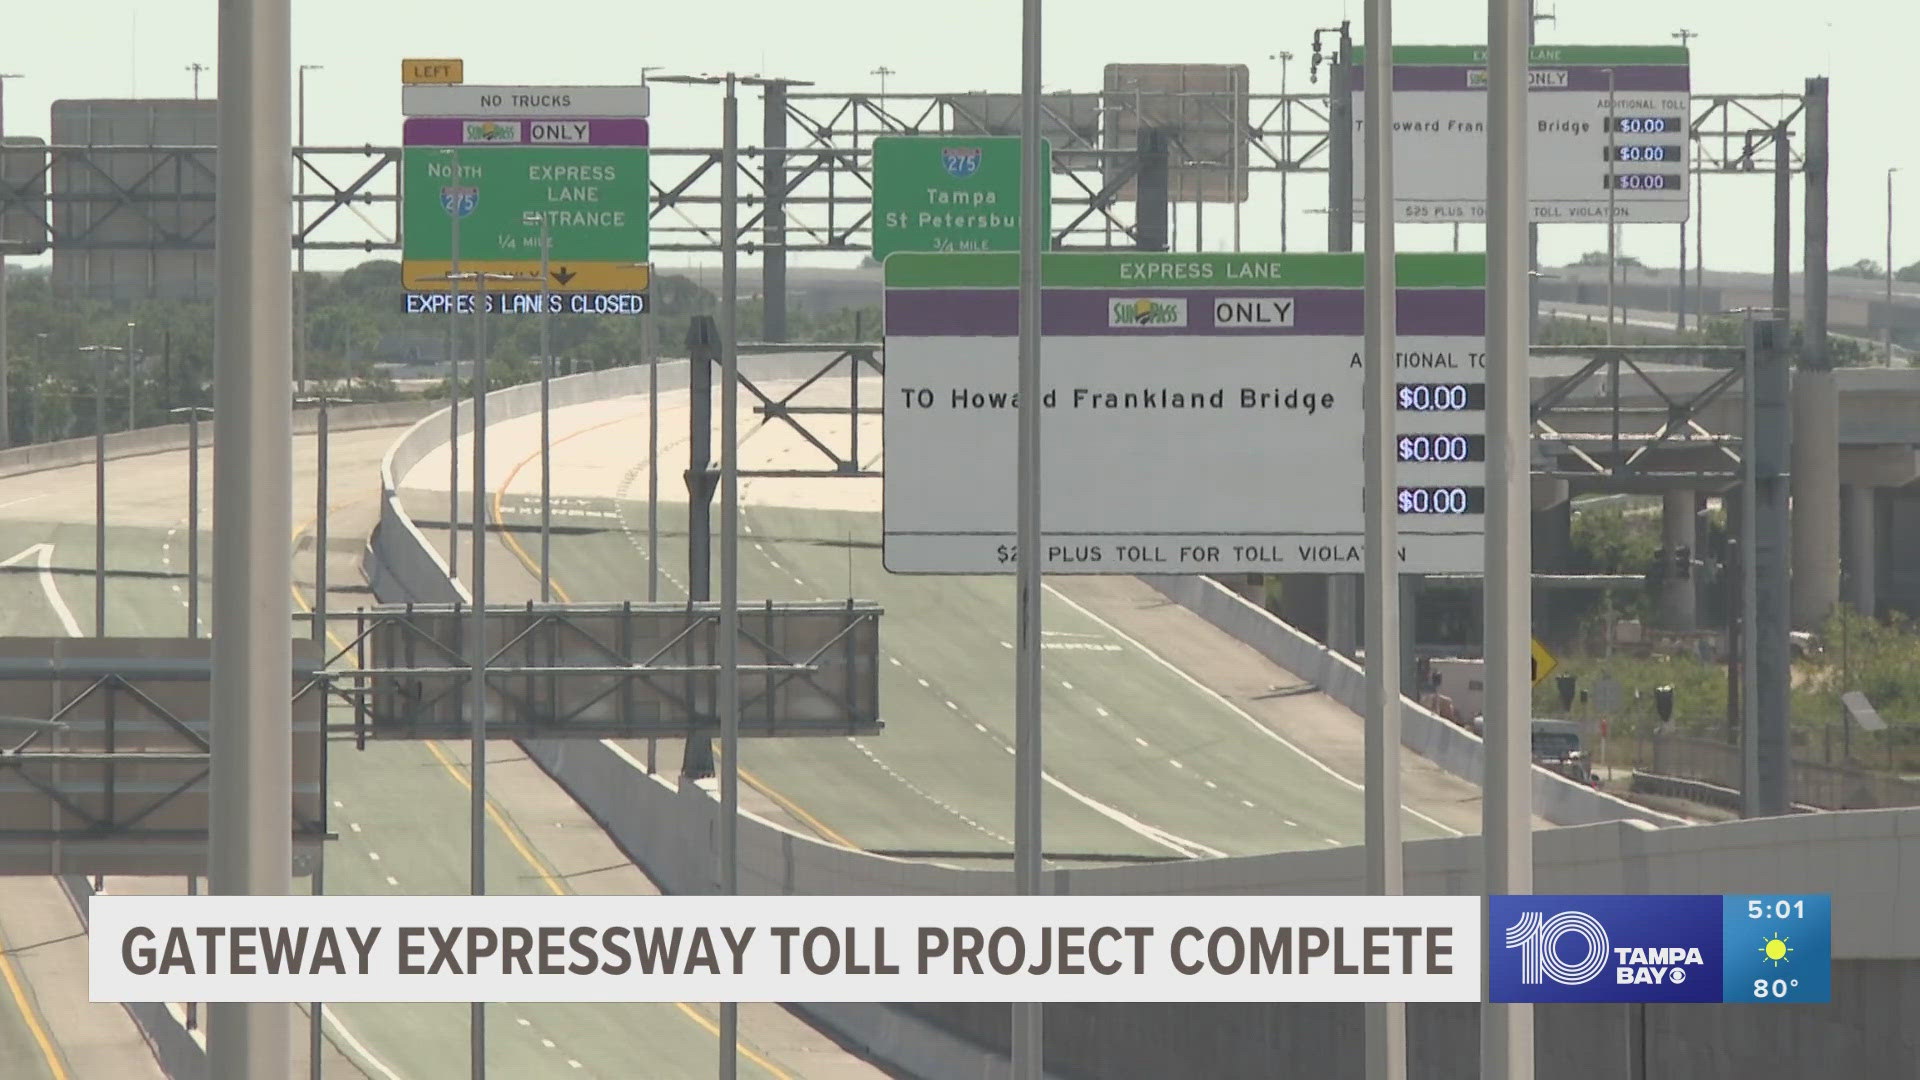 Toll amounts vary between the I-275 express lanes and the expressway's two other connecting roads.